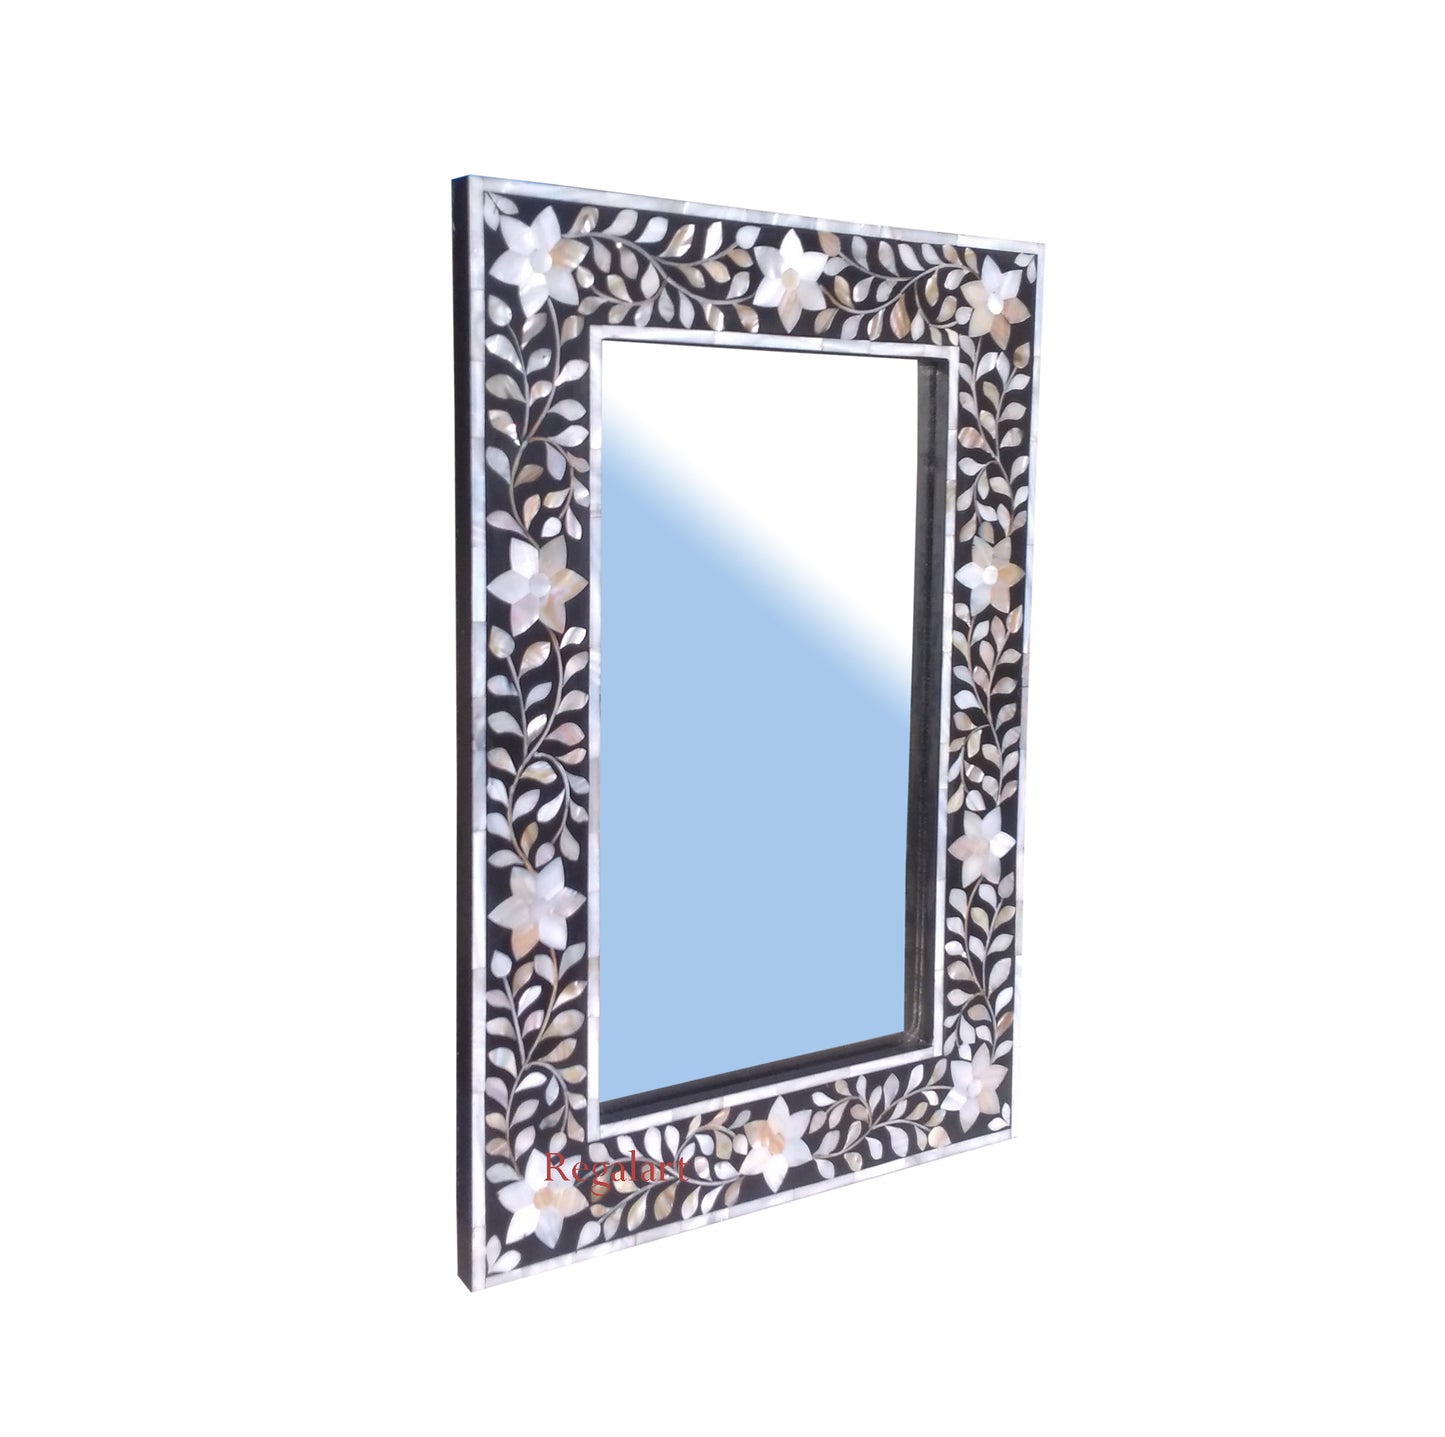 Vintage Home Decor: Handmade Mother of Pearl Wall Mirror